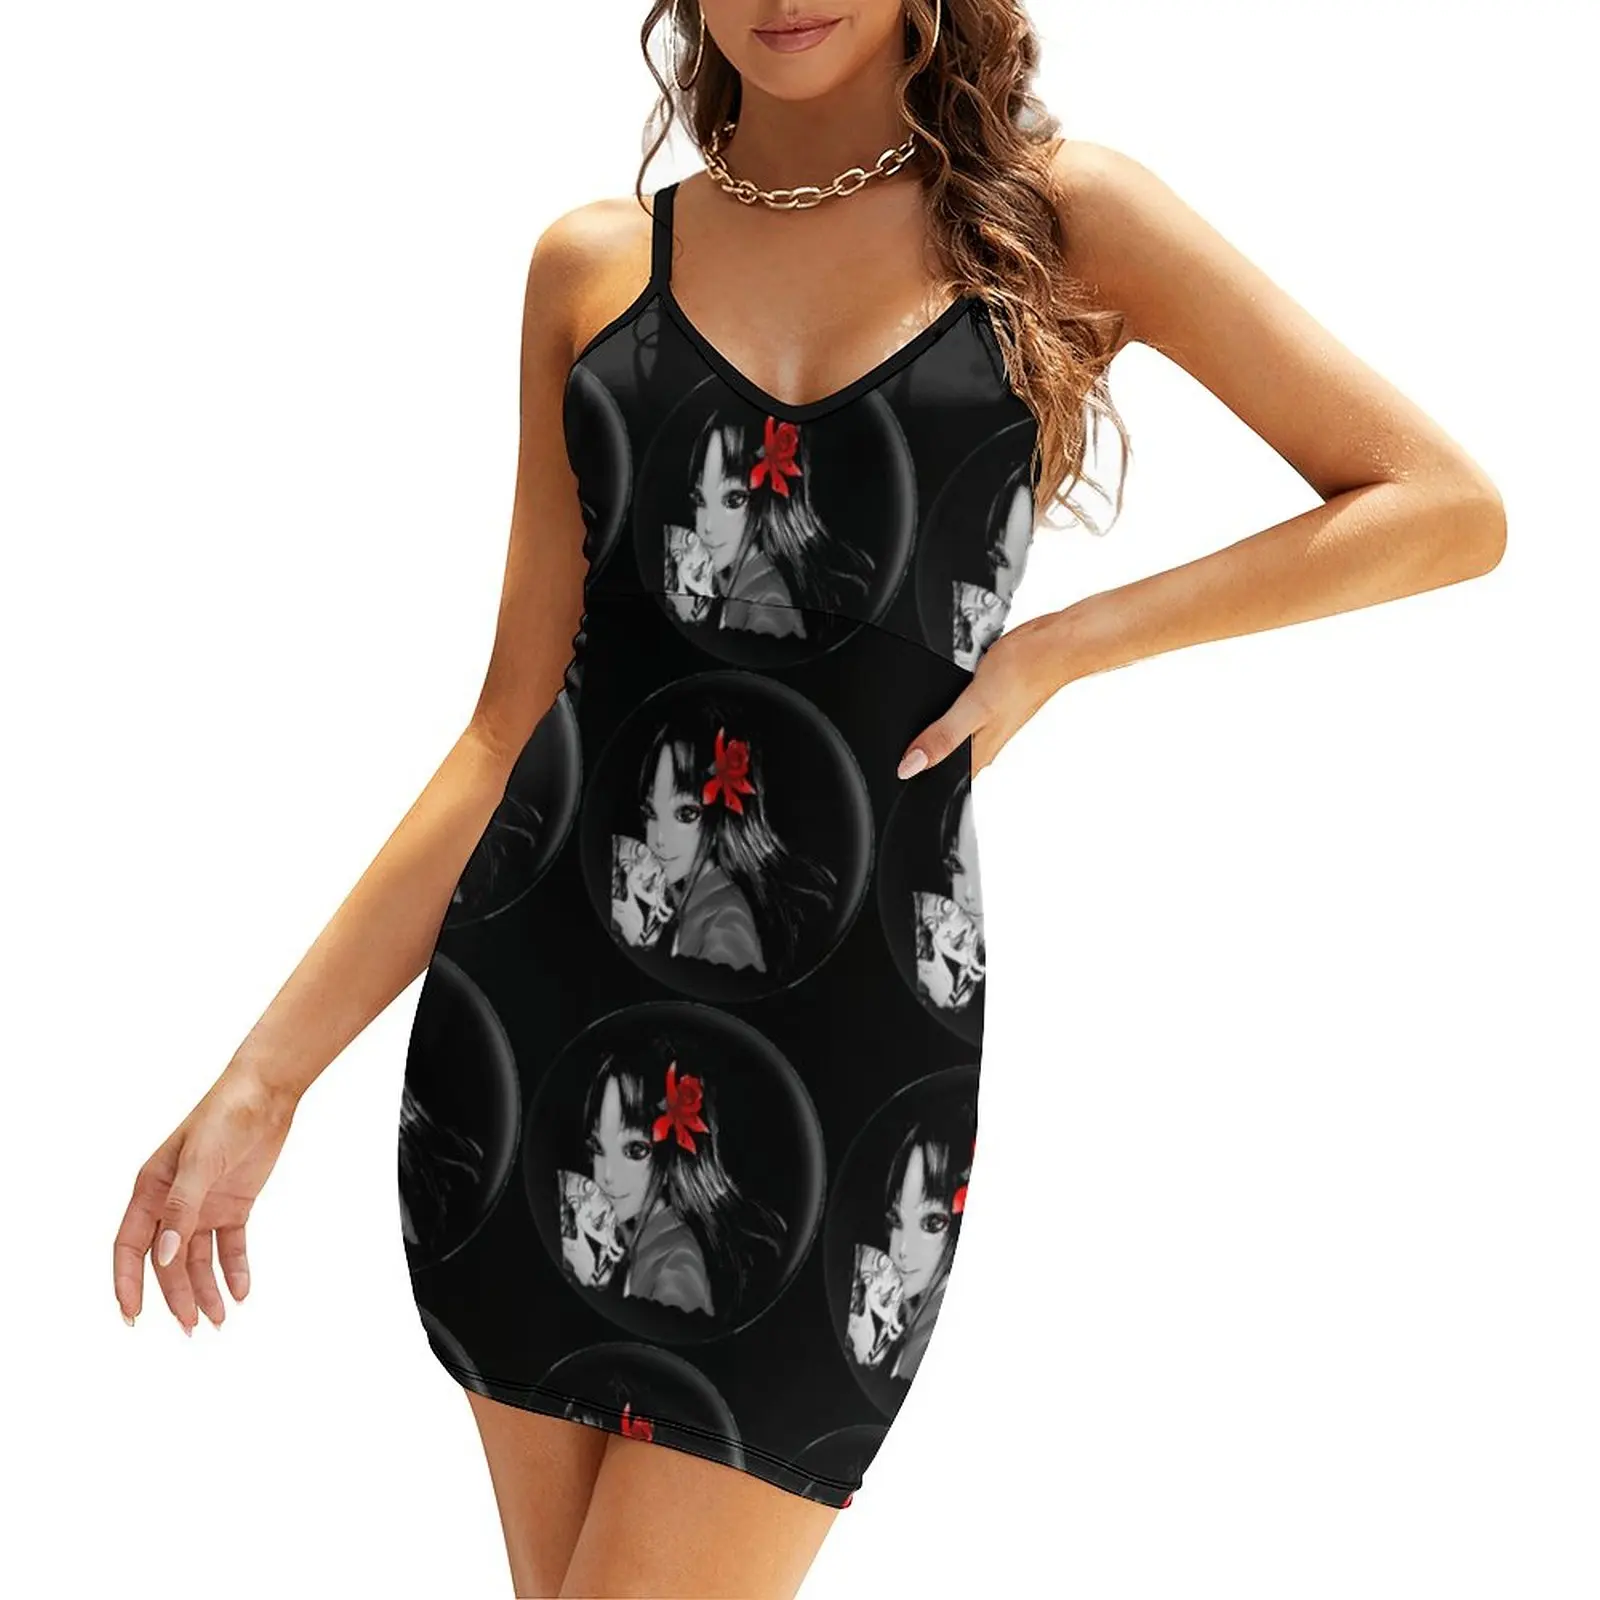 

Tomie Junji Ito Tomie Junji Itot(1) Women's Sling Dress Humor Graphic Dresses Funny Graphic Sexy Woman's Dress Clubs